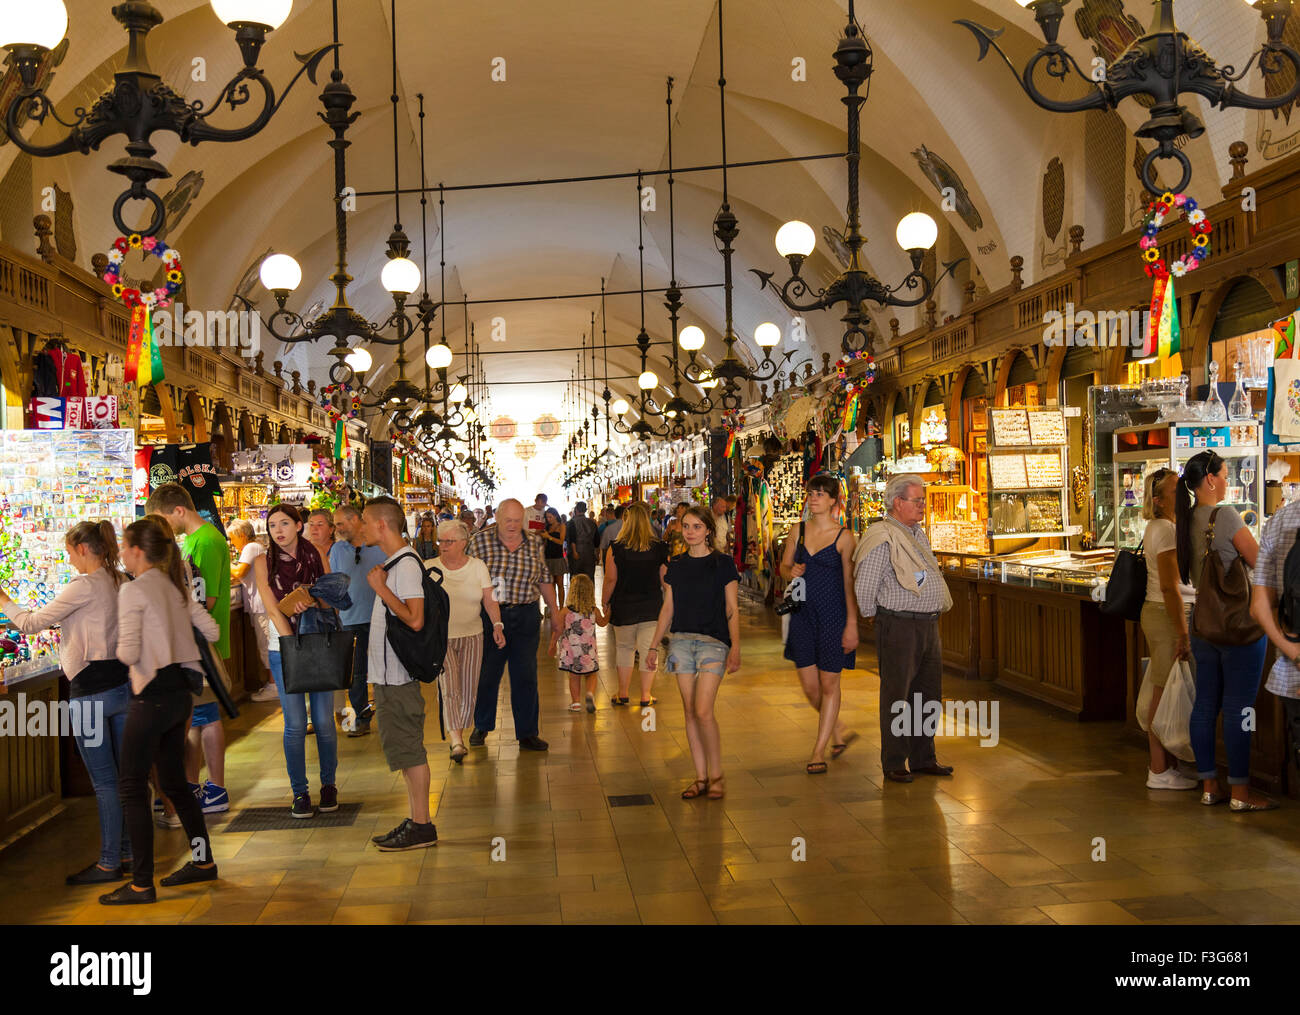 Shopping stalls in the Cloth Hall, Krakow Stock Photo